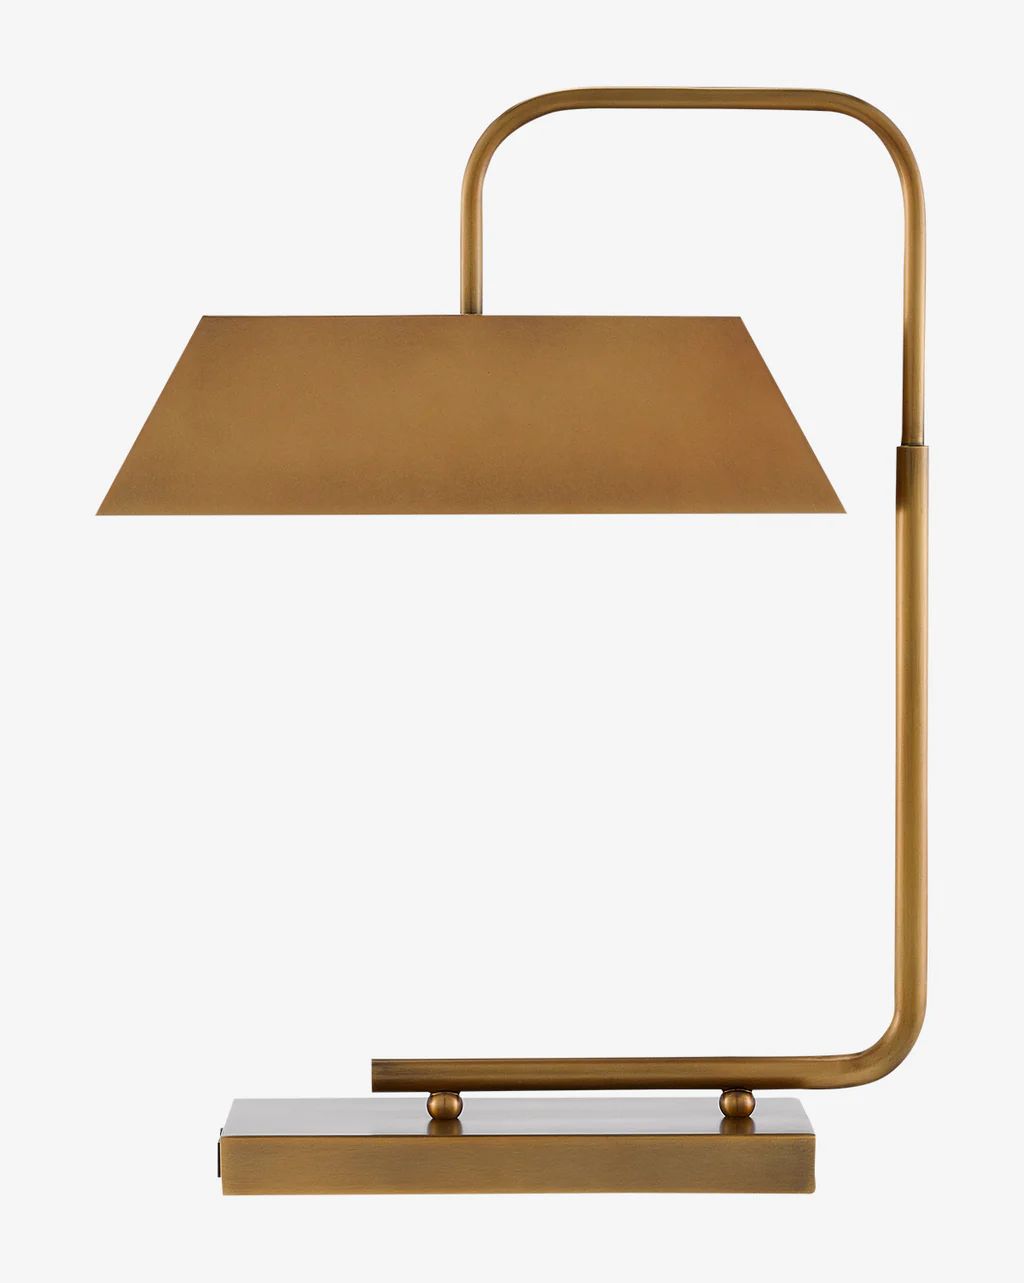 Hoxton Brass Lamp | McGee & Co.